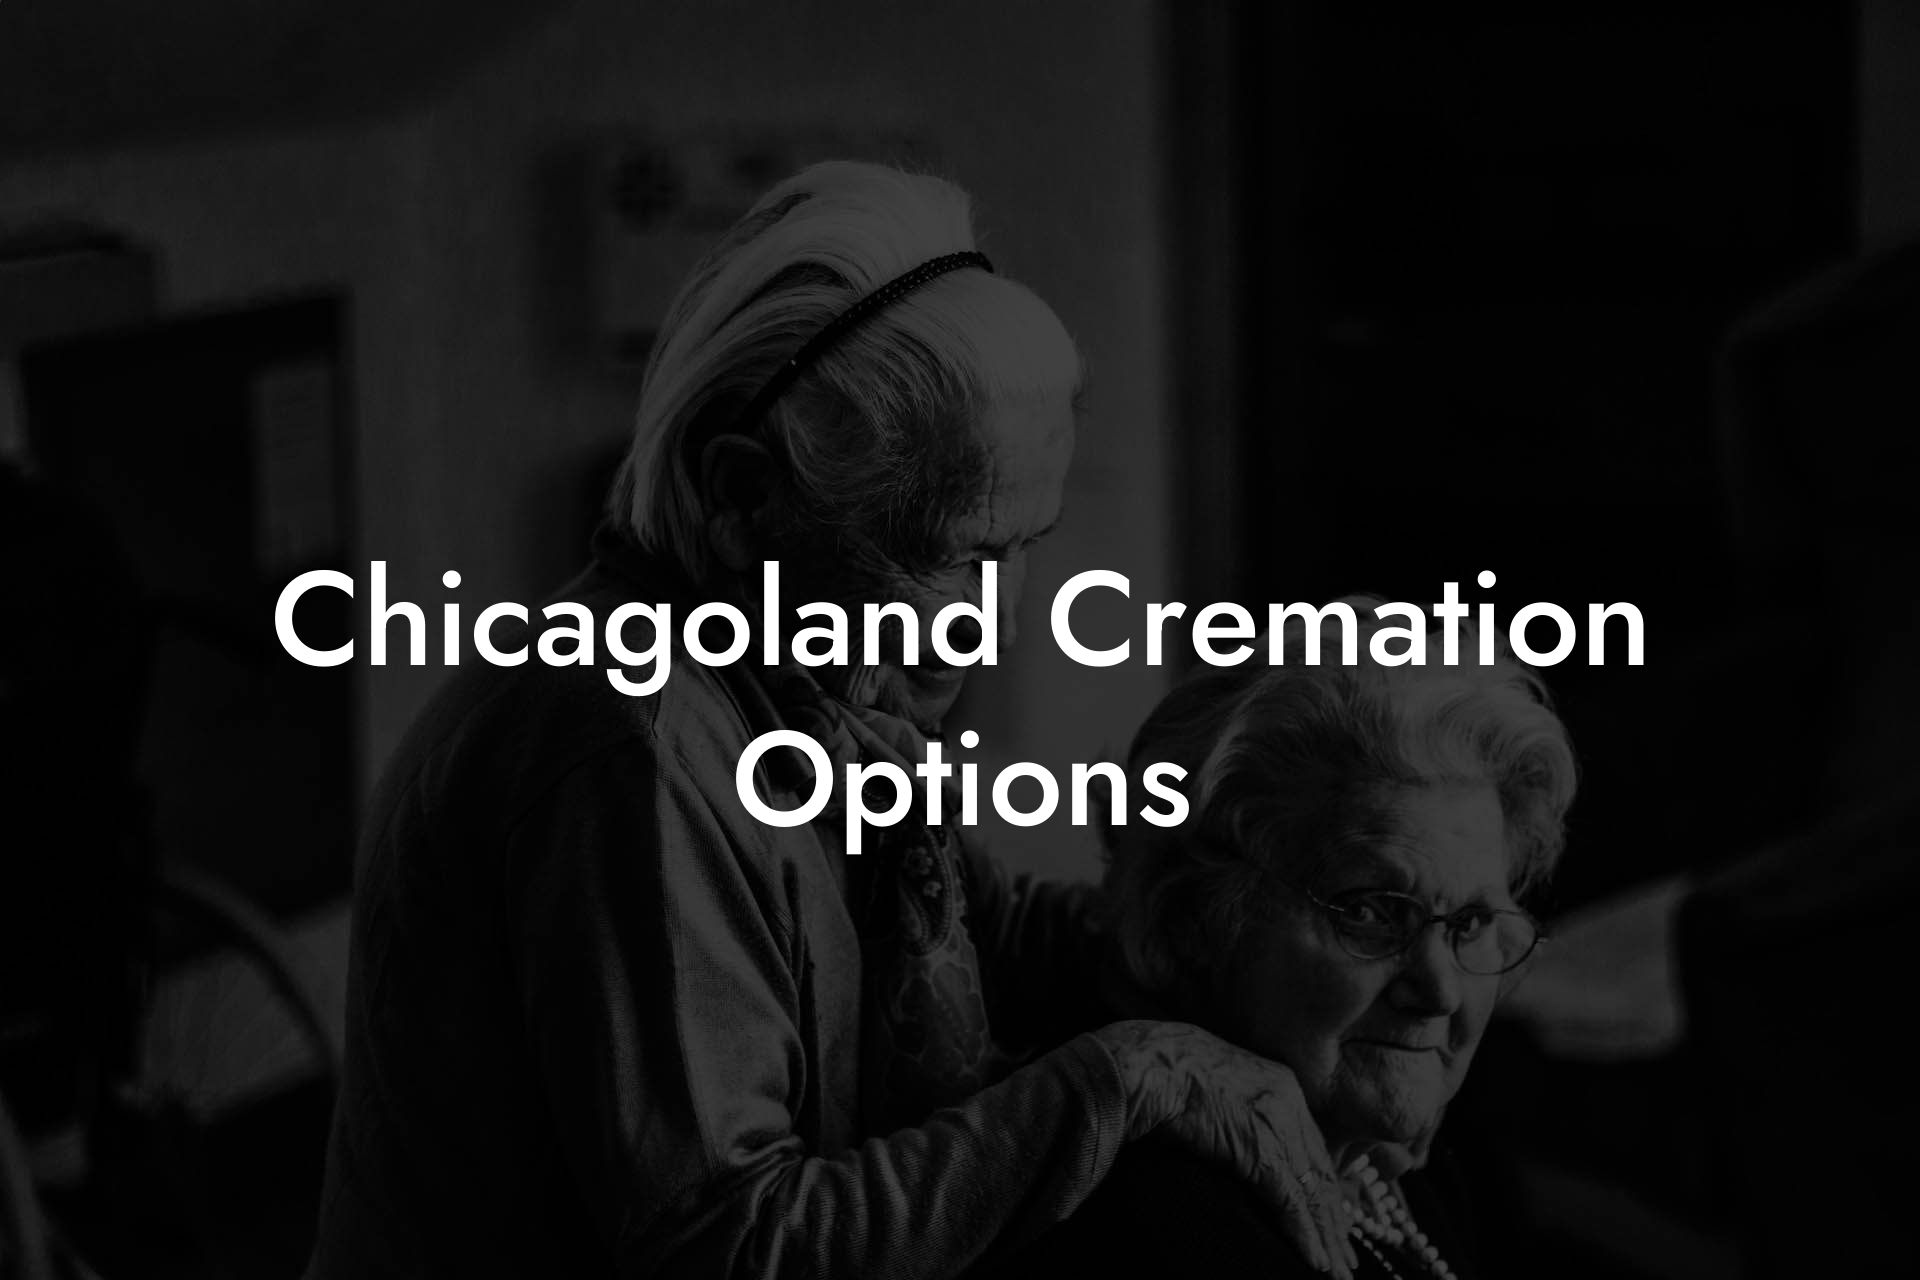 Chicagoland Cremation Options